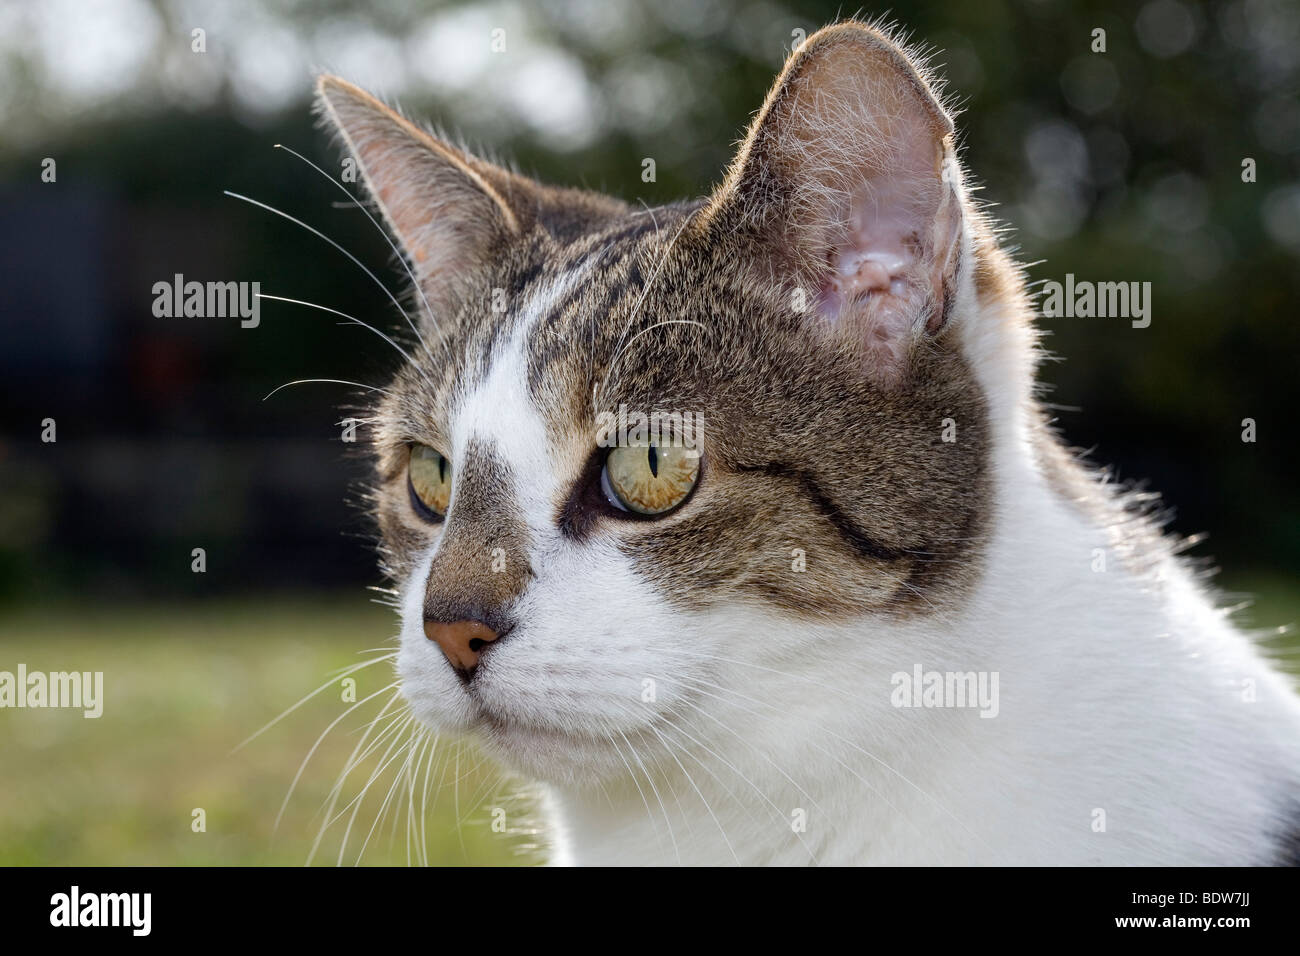 / Blanc Tabby cat close up Banque D'Images